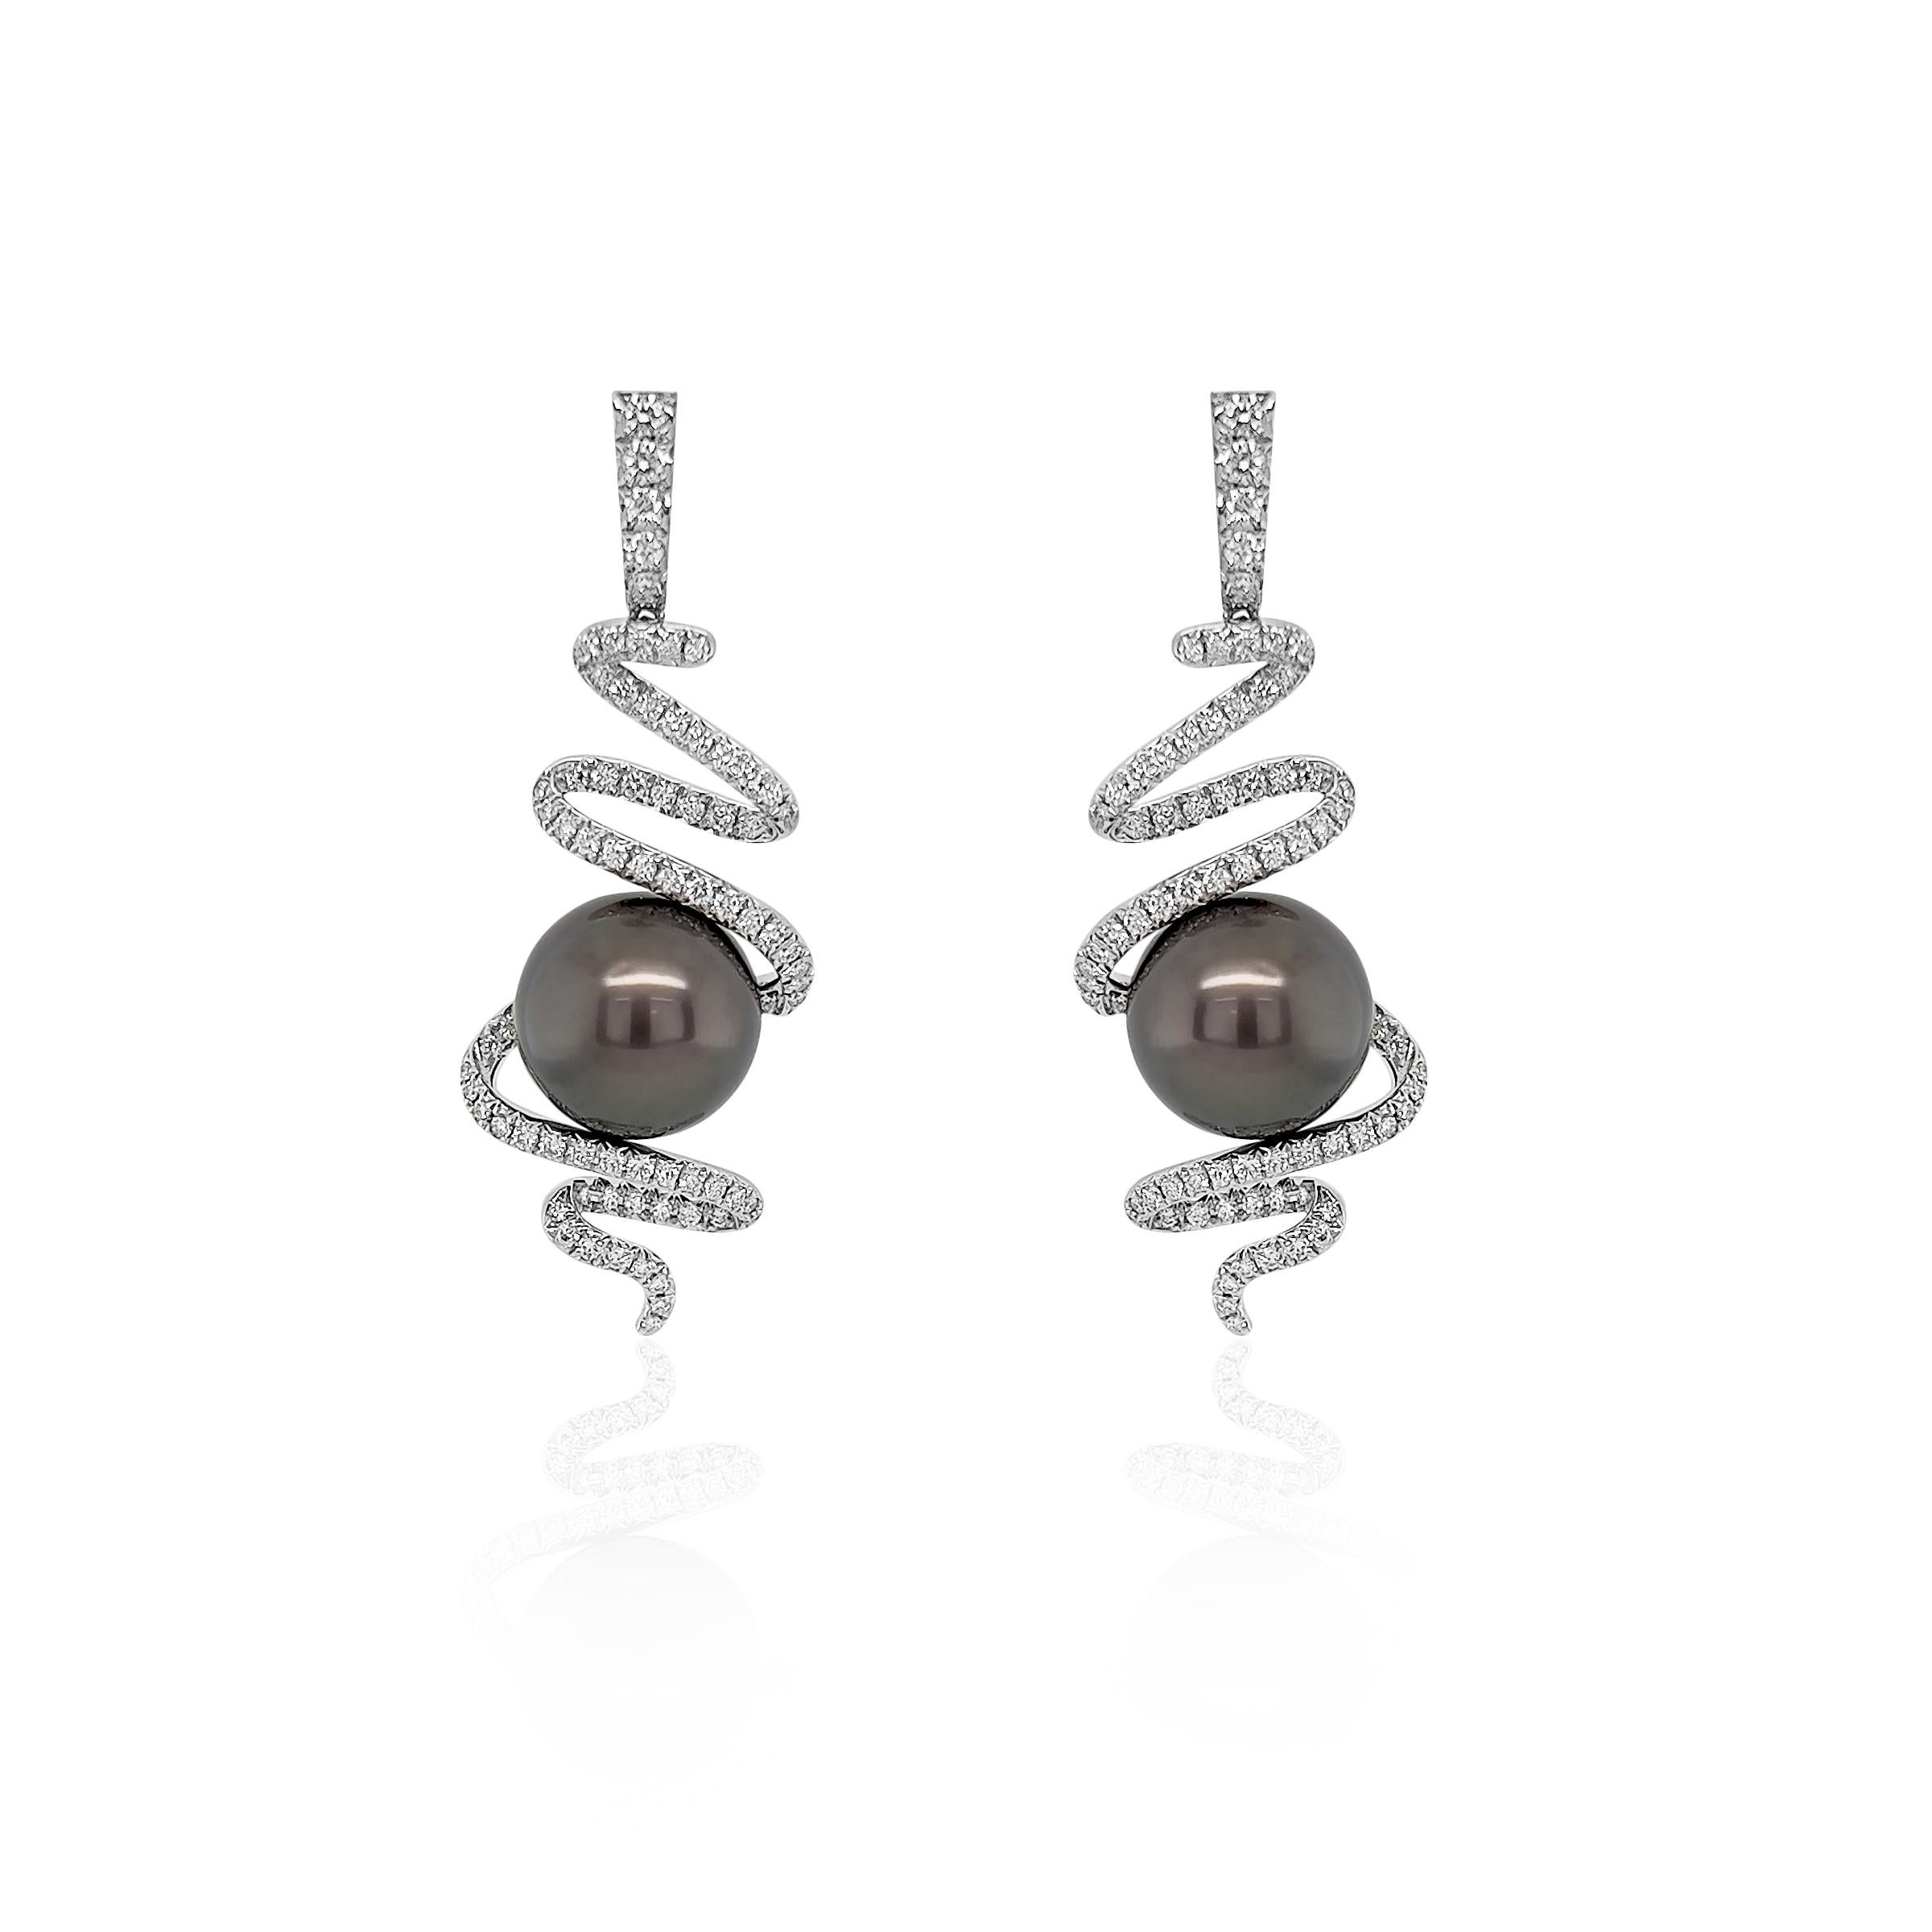 This exquisite pair of earrings embodies elegance and originality. These earrings showcase a mesmerizing spiral design, meticulously encrusted with natural diamonds and at the heart of the earrings lie a 13mm Tahitian Pearl. All set in 18k white